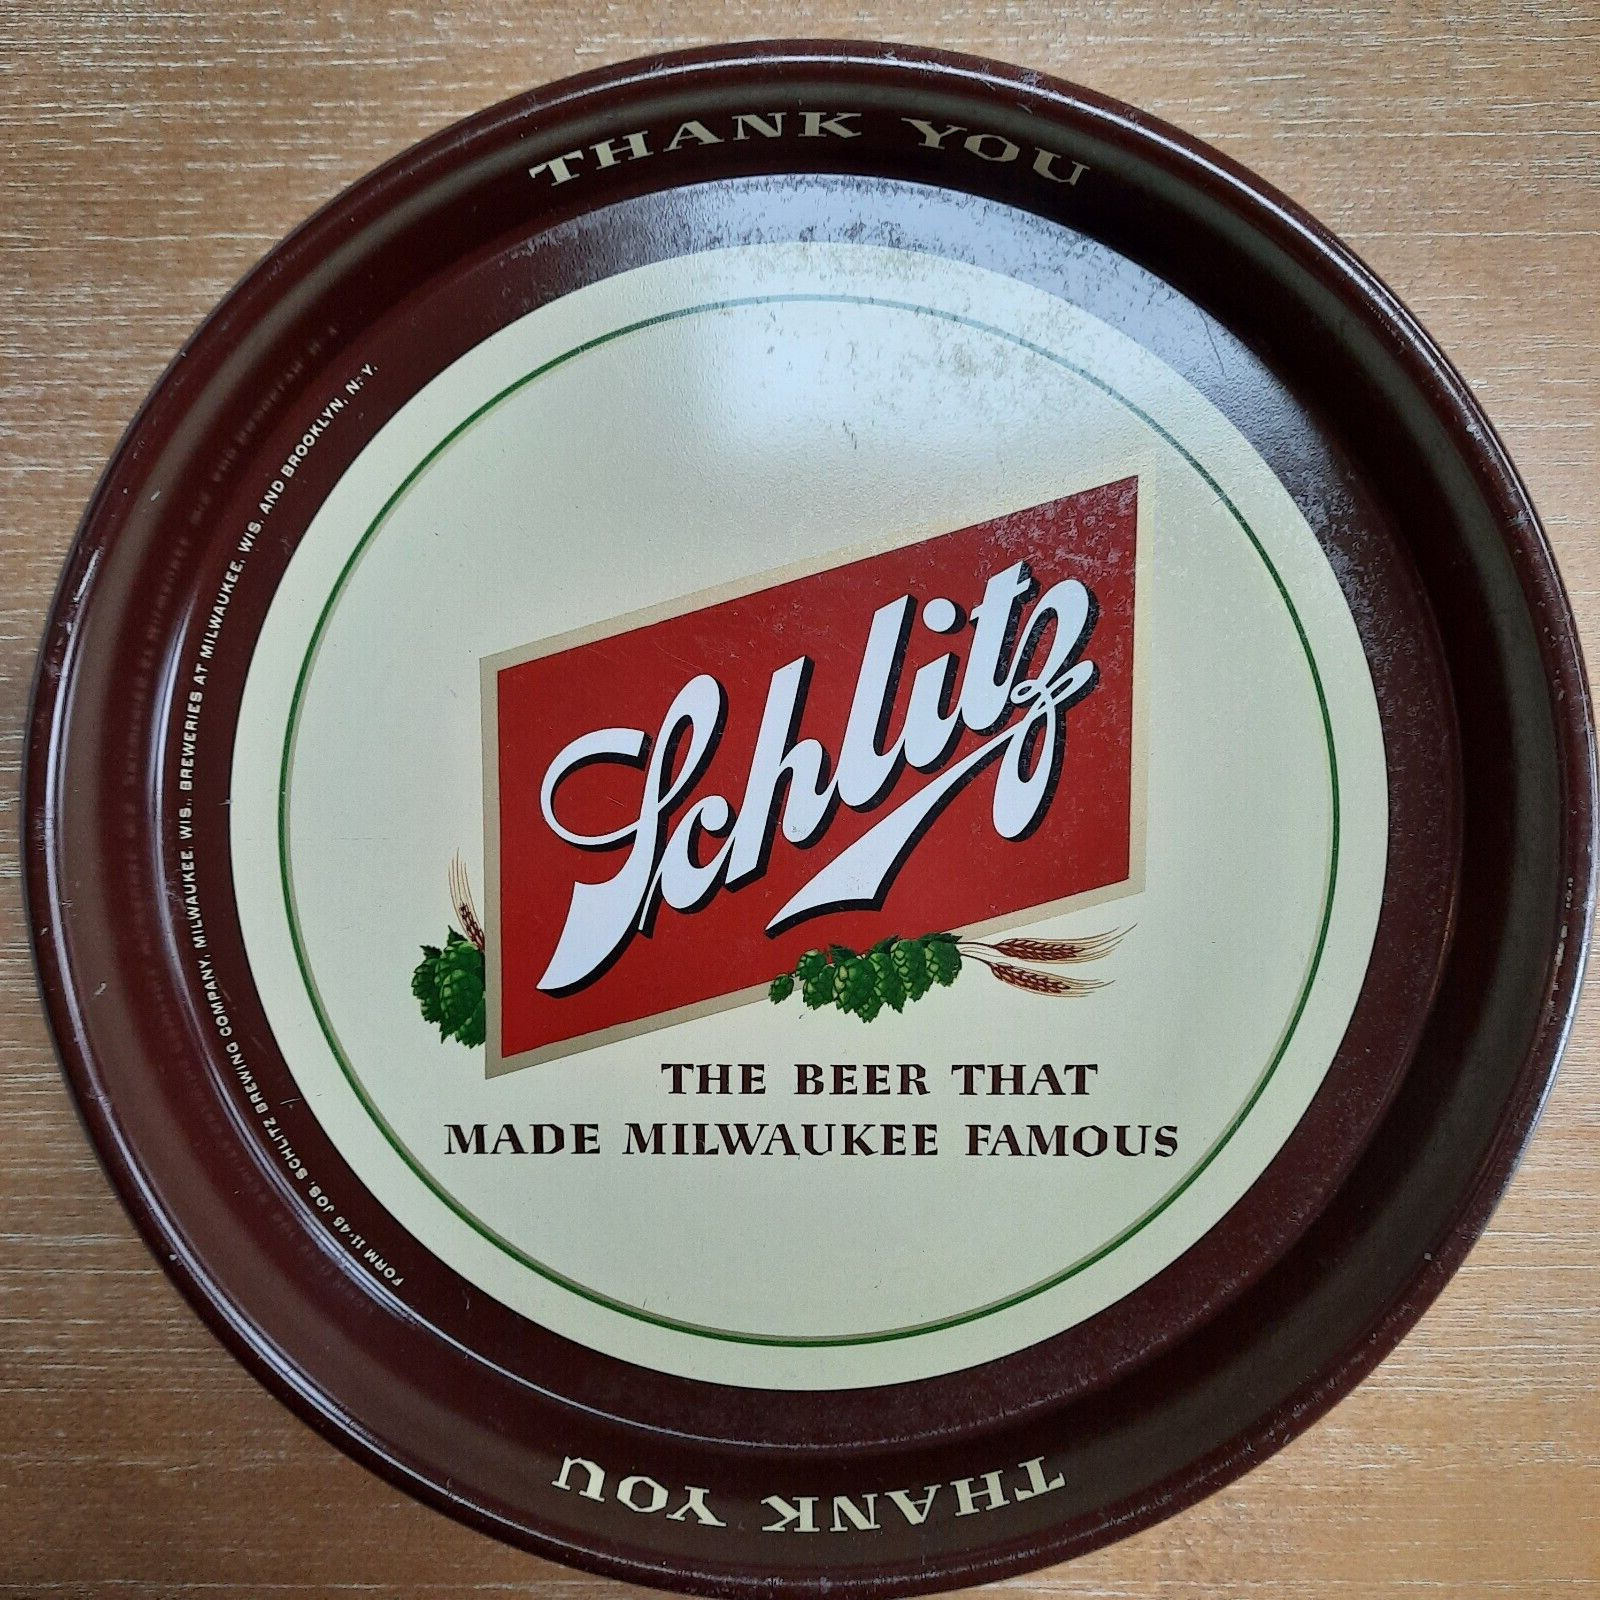 Vintage double sided Schlitz beer serving tray